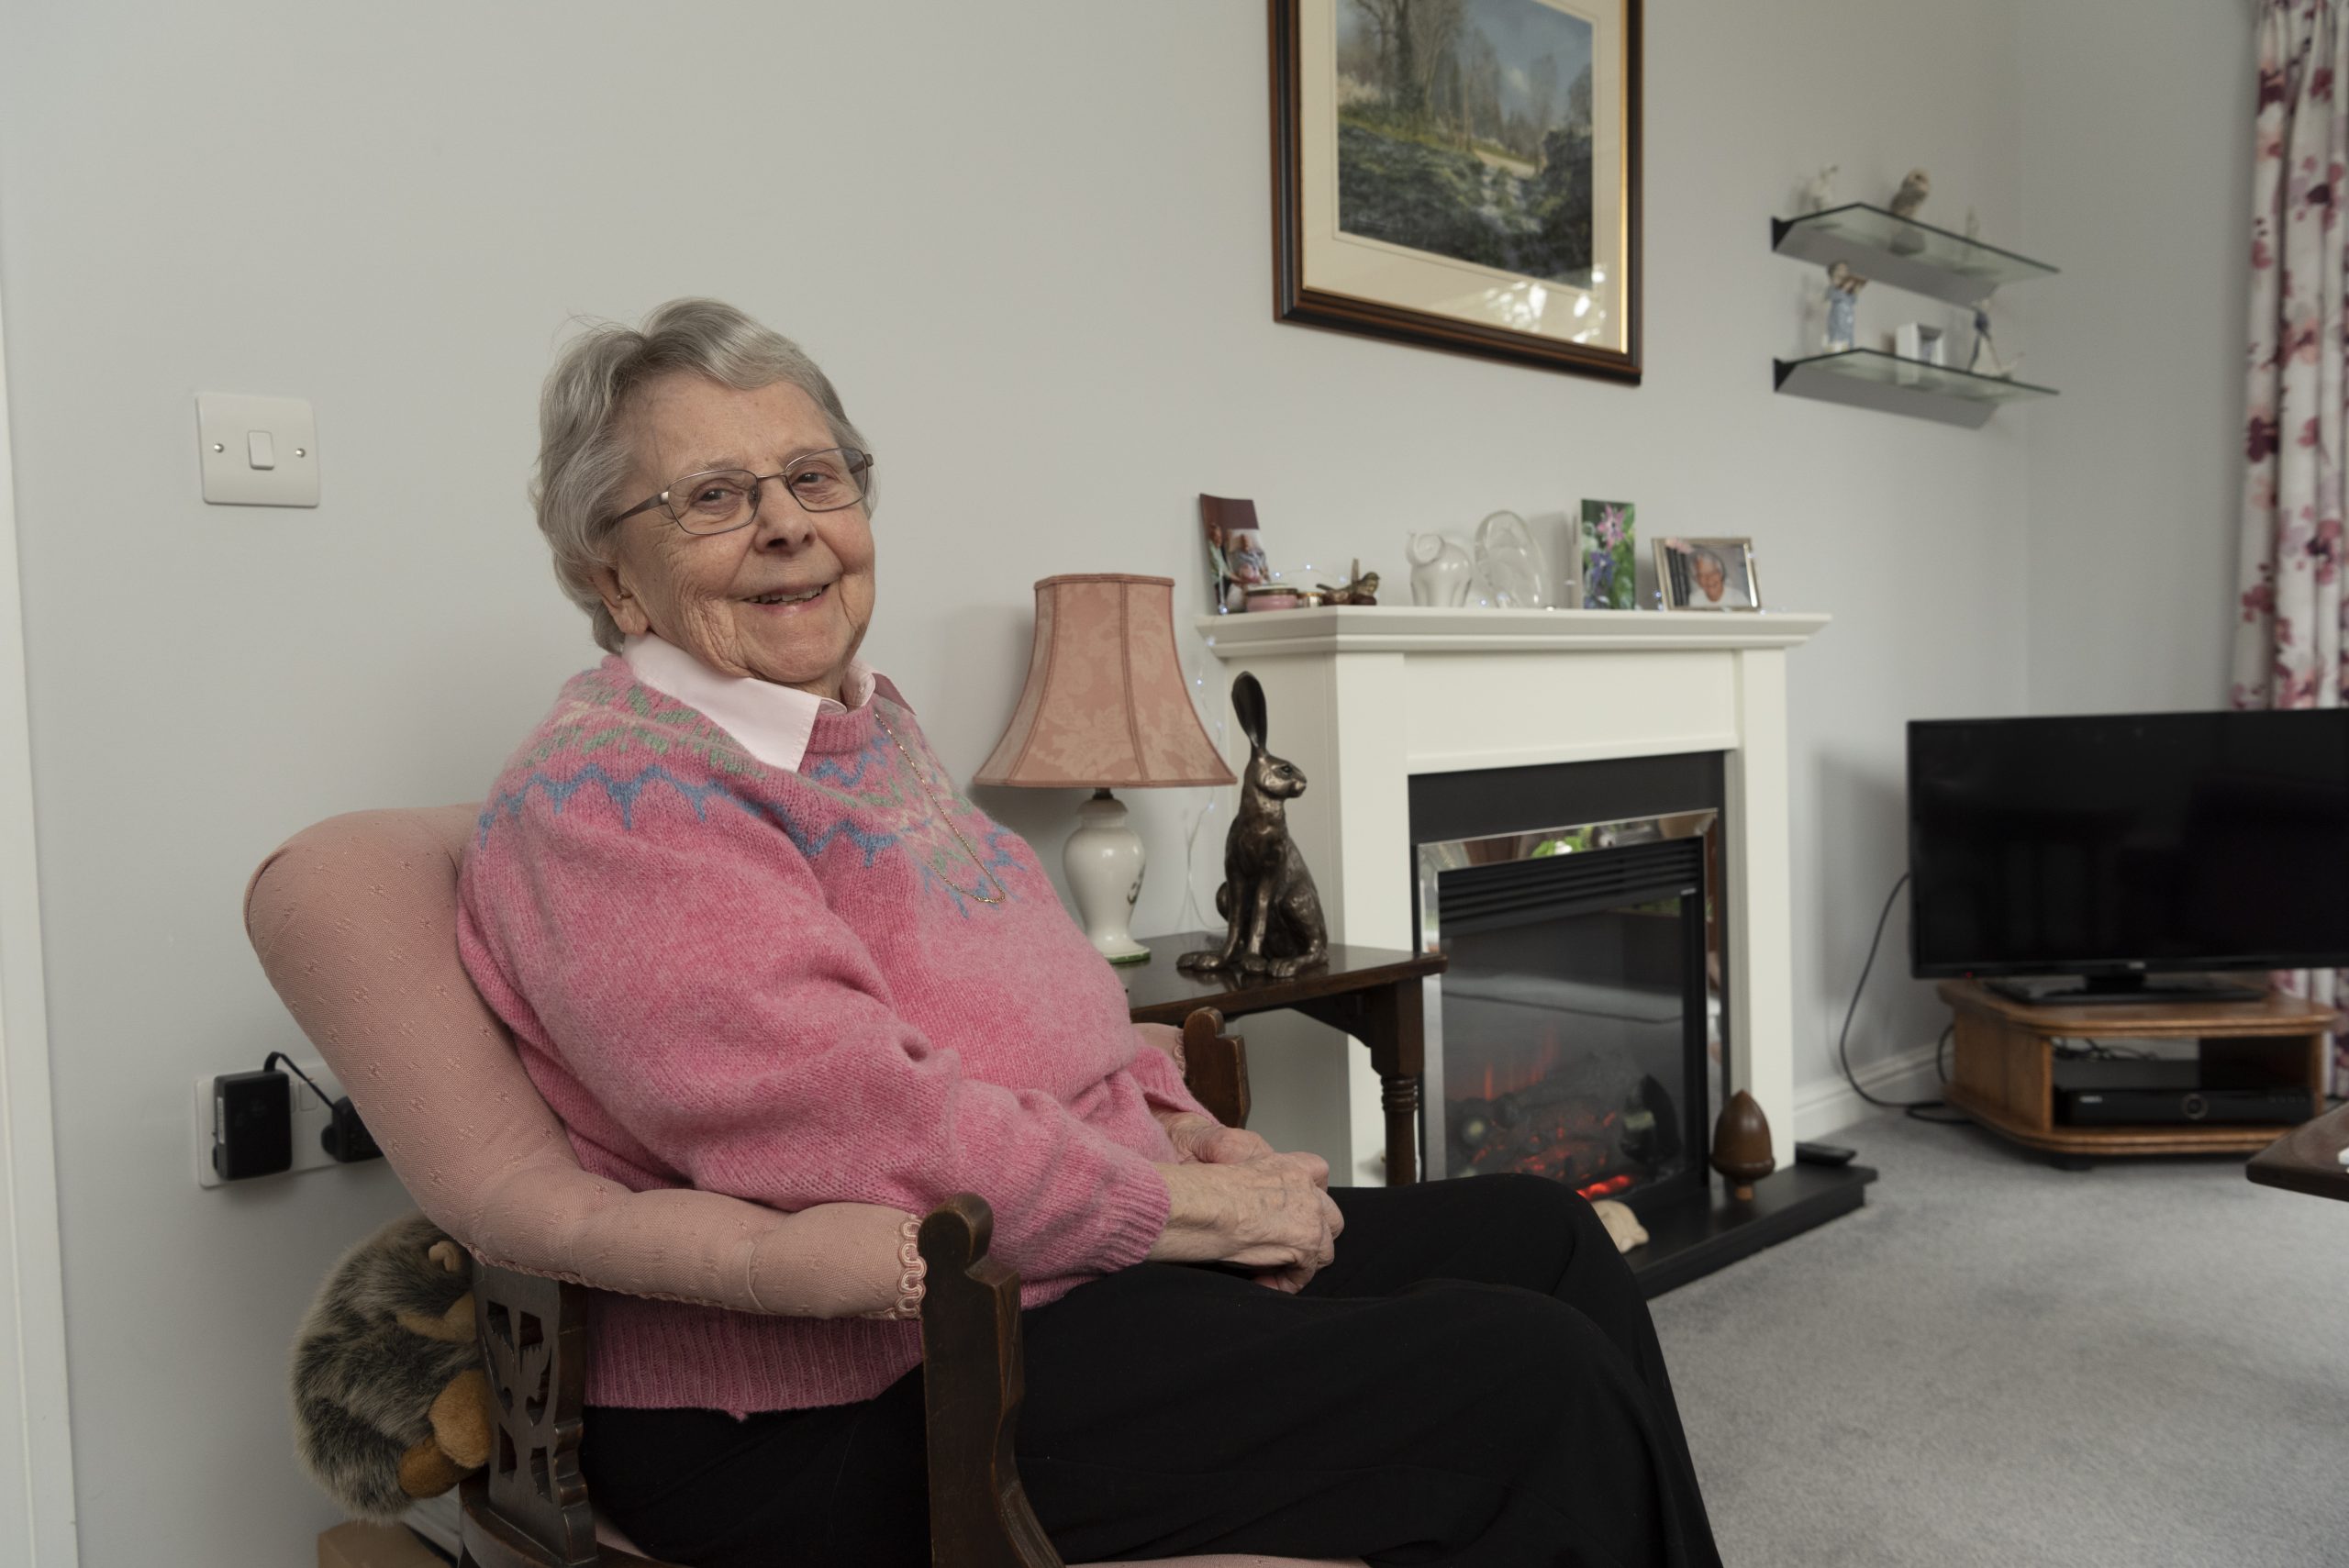 Extra Care Mews resident smiling in apartment